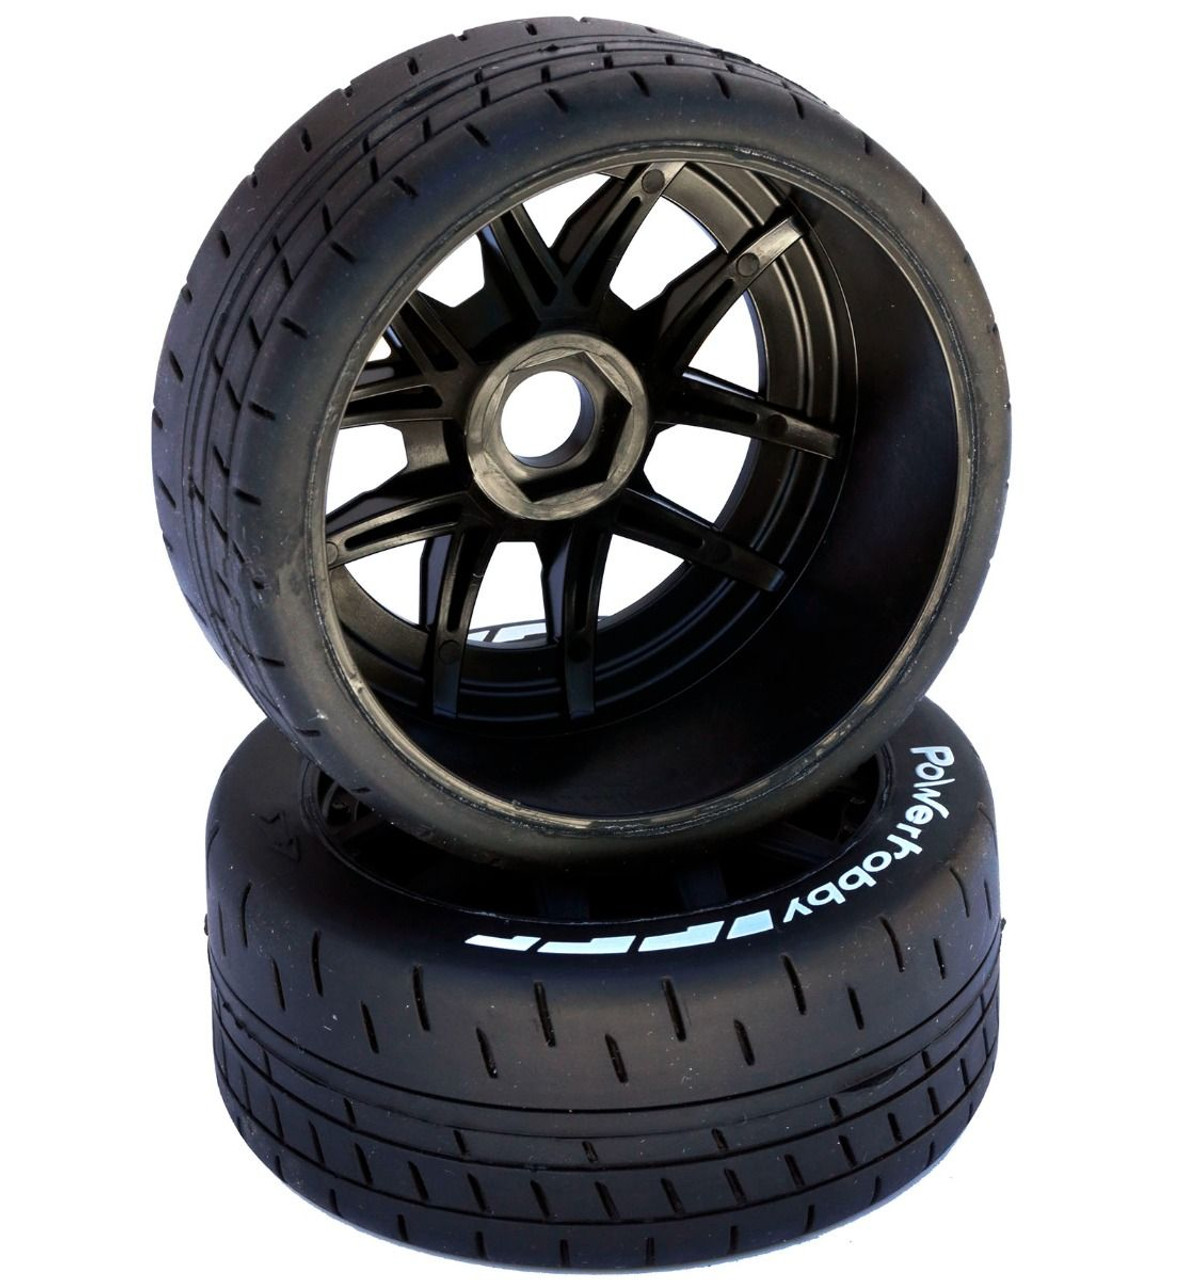 Power Hobby 1/8 GT Beast Belted Medium Compound Tires 17mm Hex (Black)